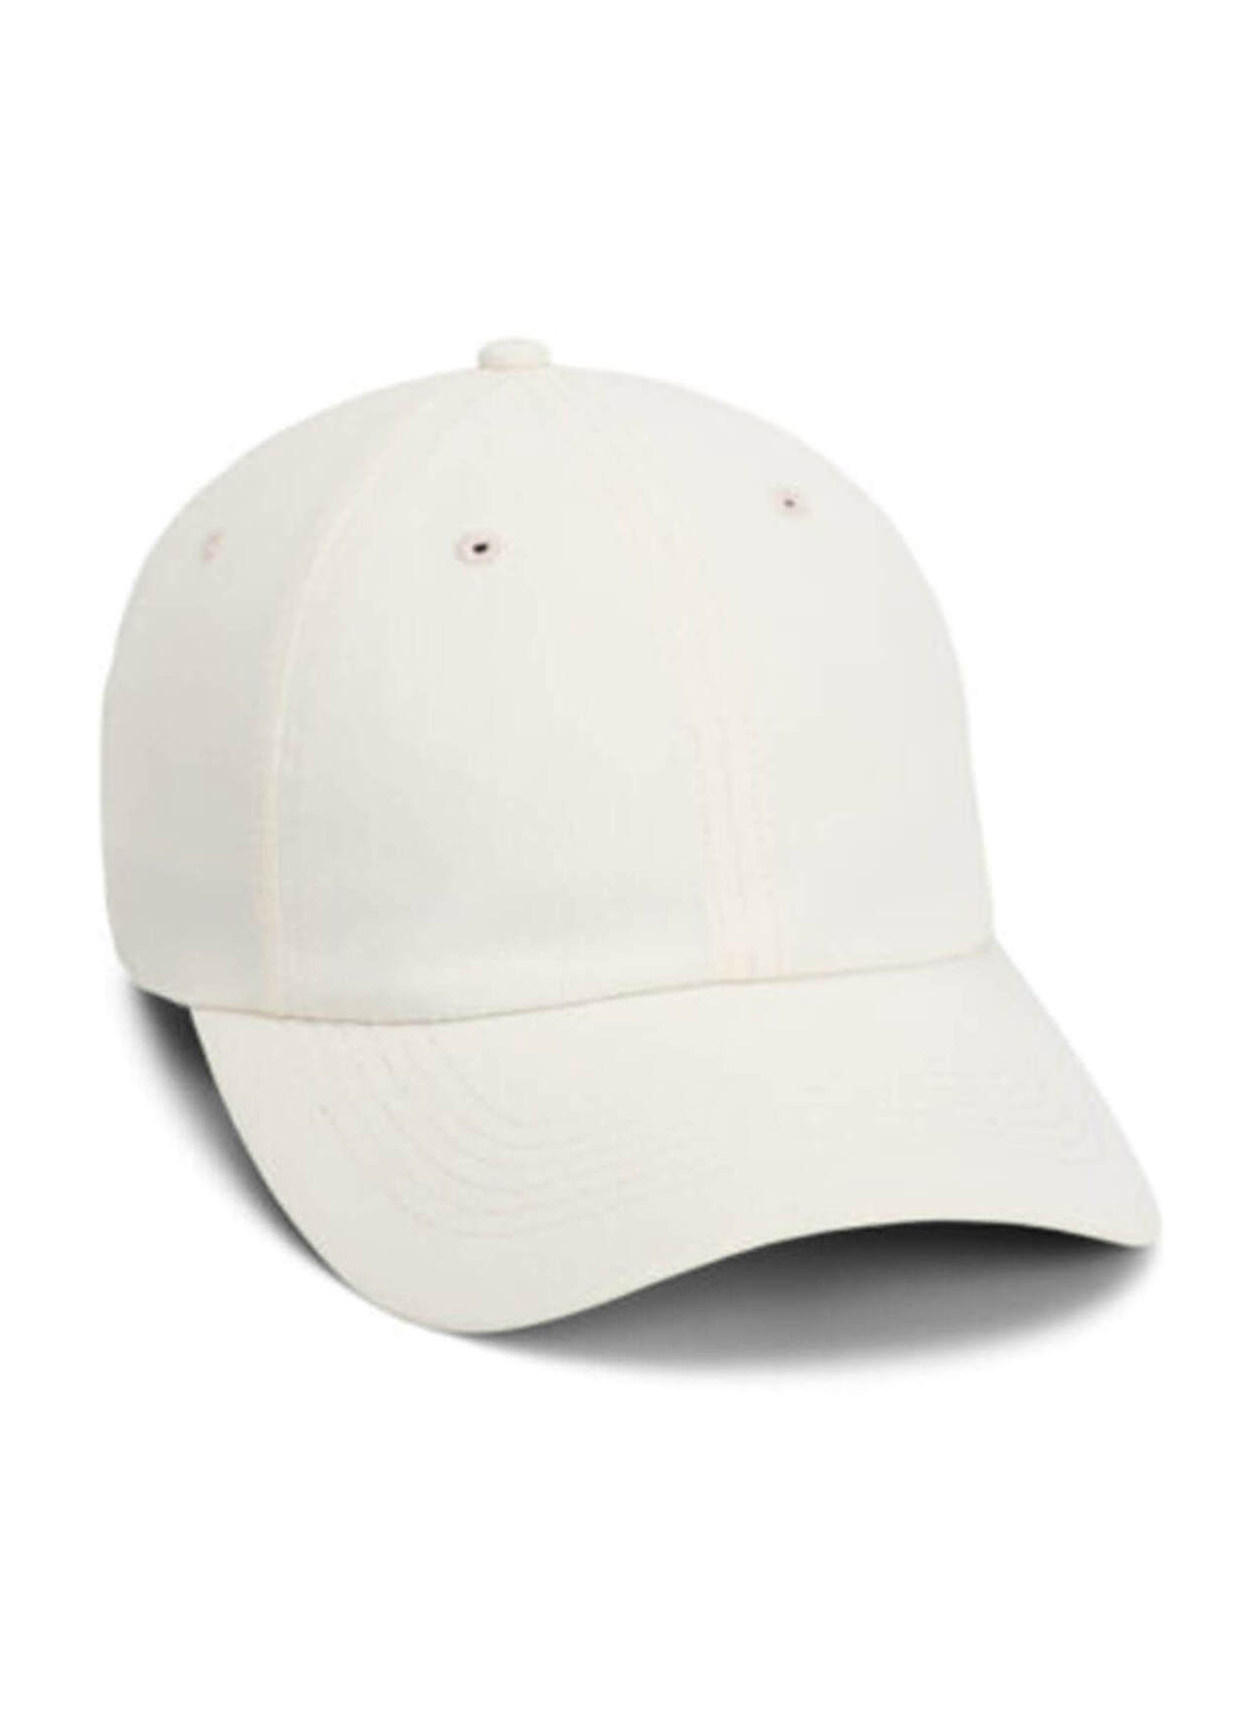 Imperial Macaroon Original Small Fit Performance Hat